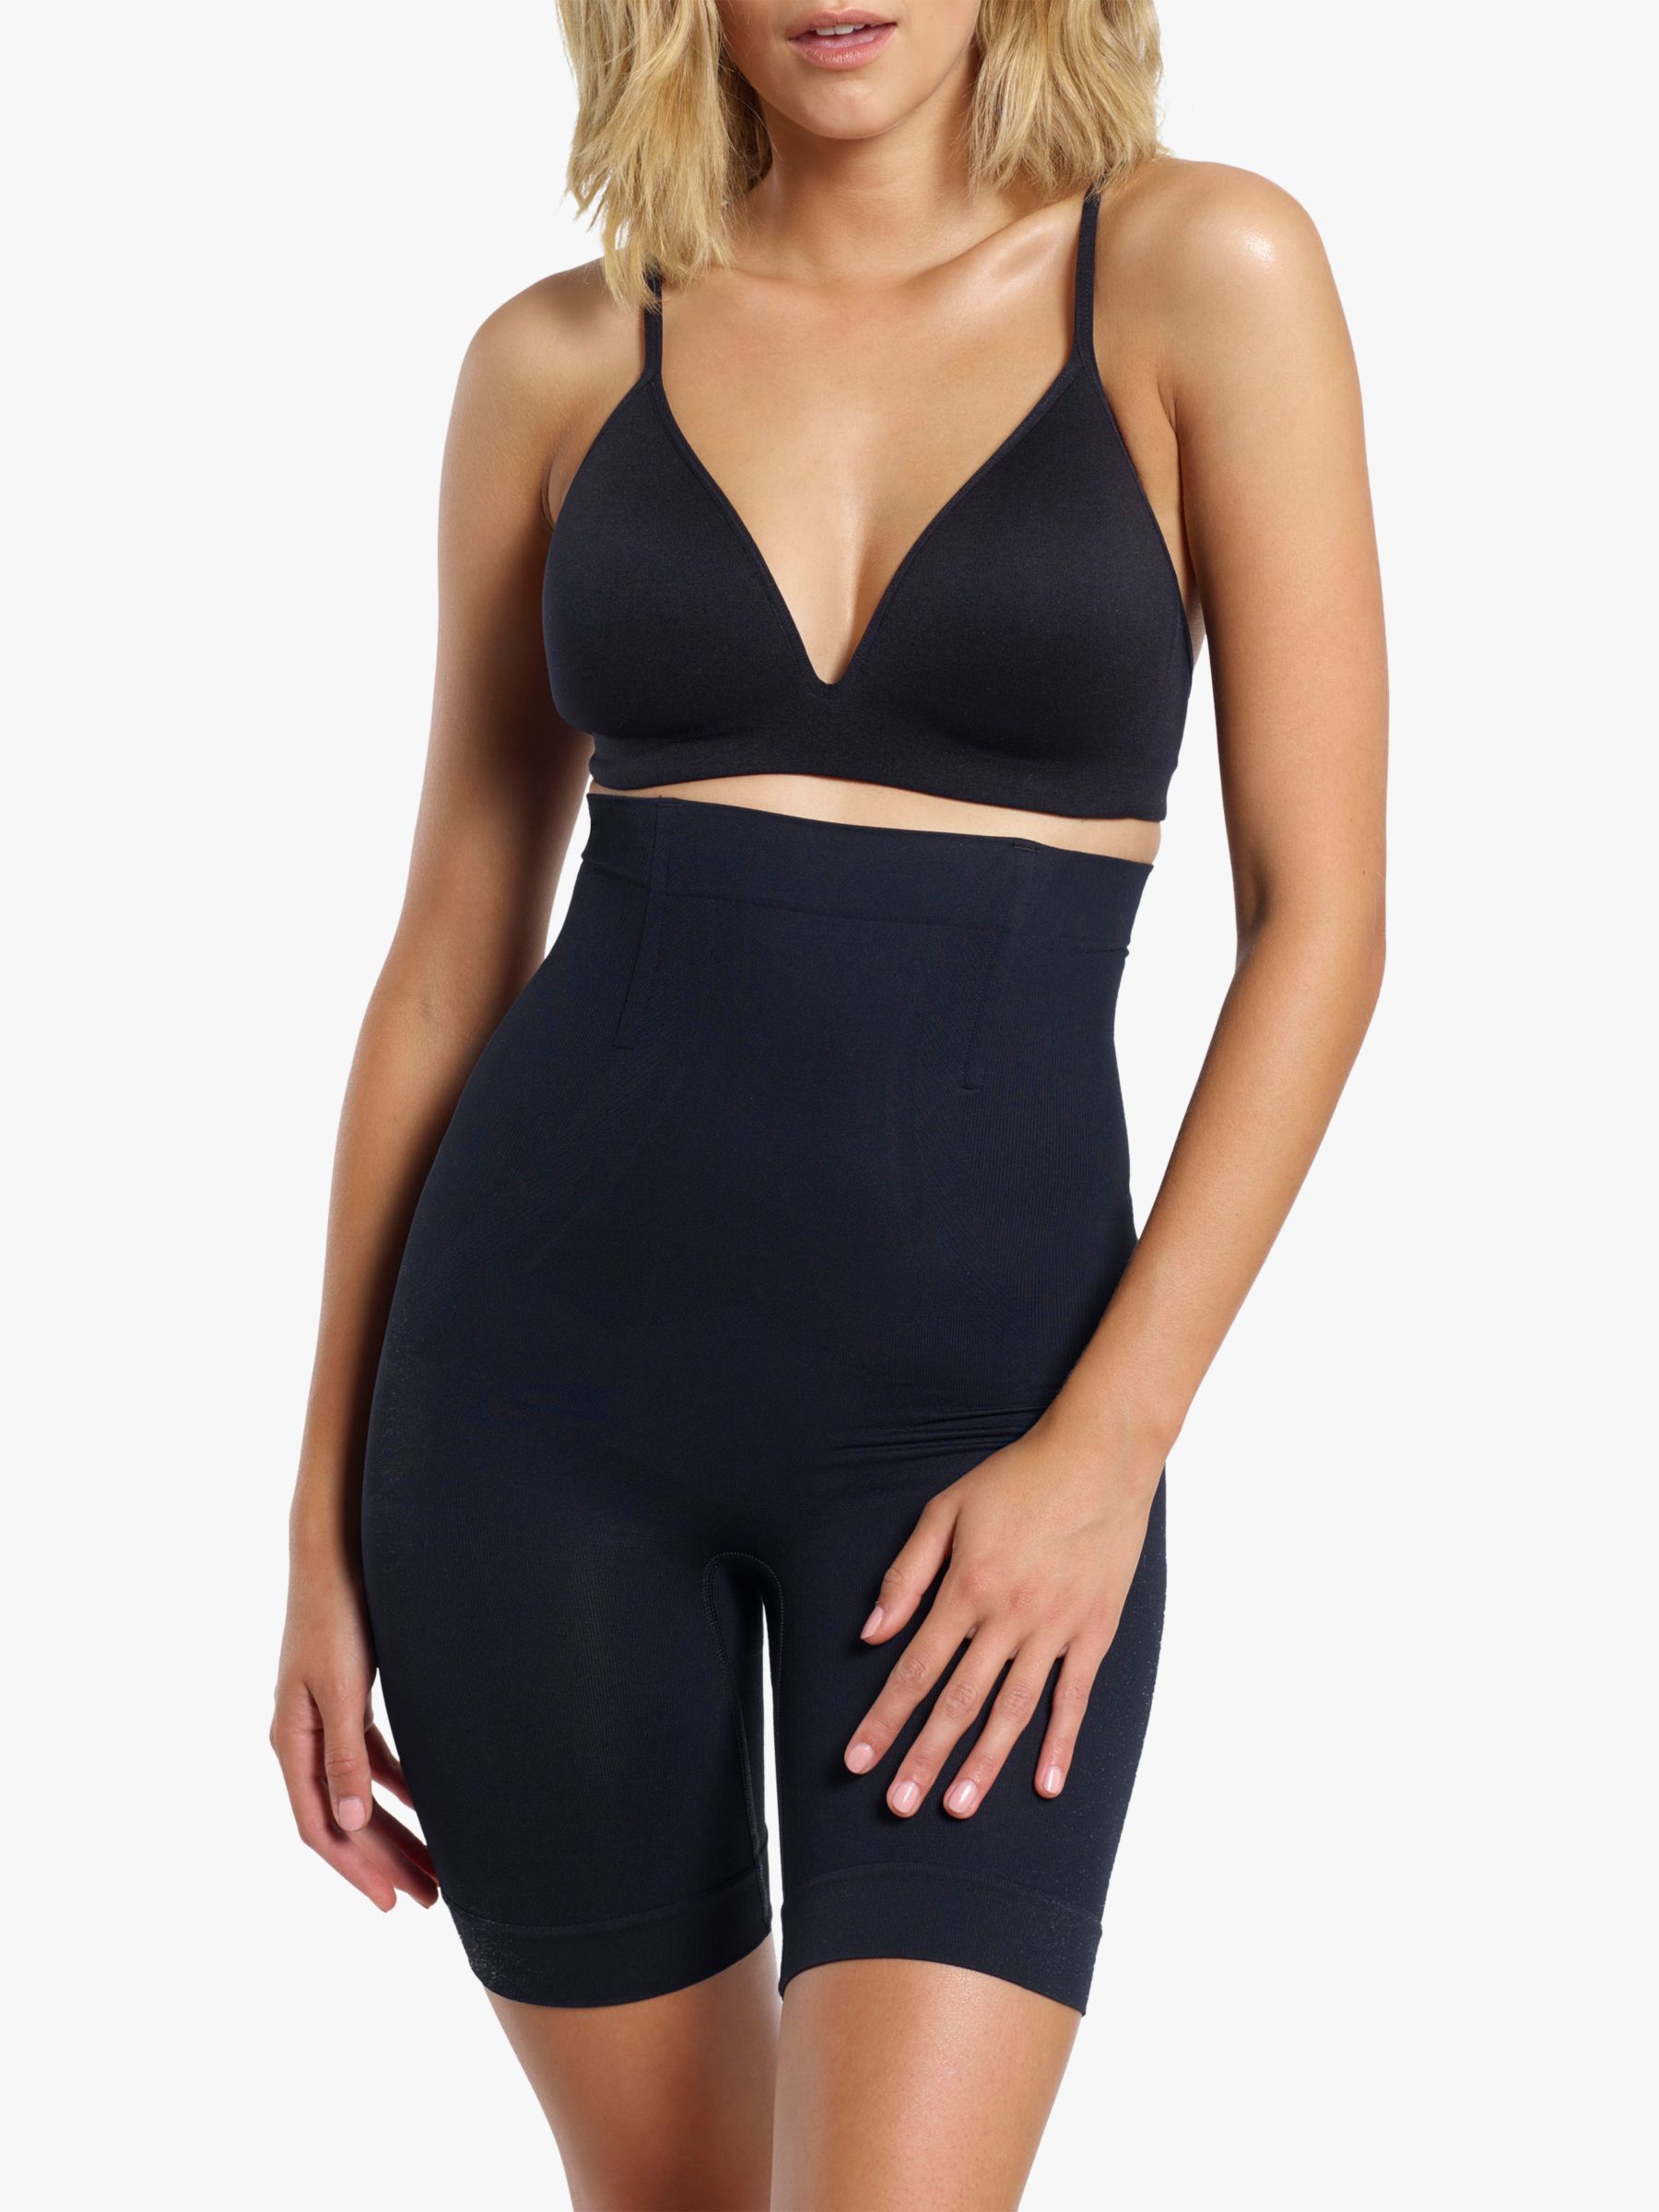 Ambra Shapewear is back and better than ever! Explore the full